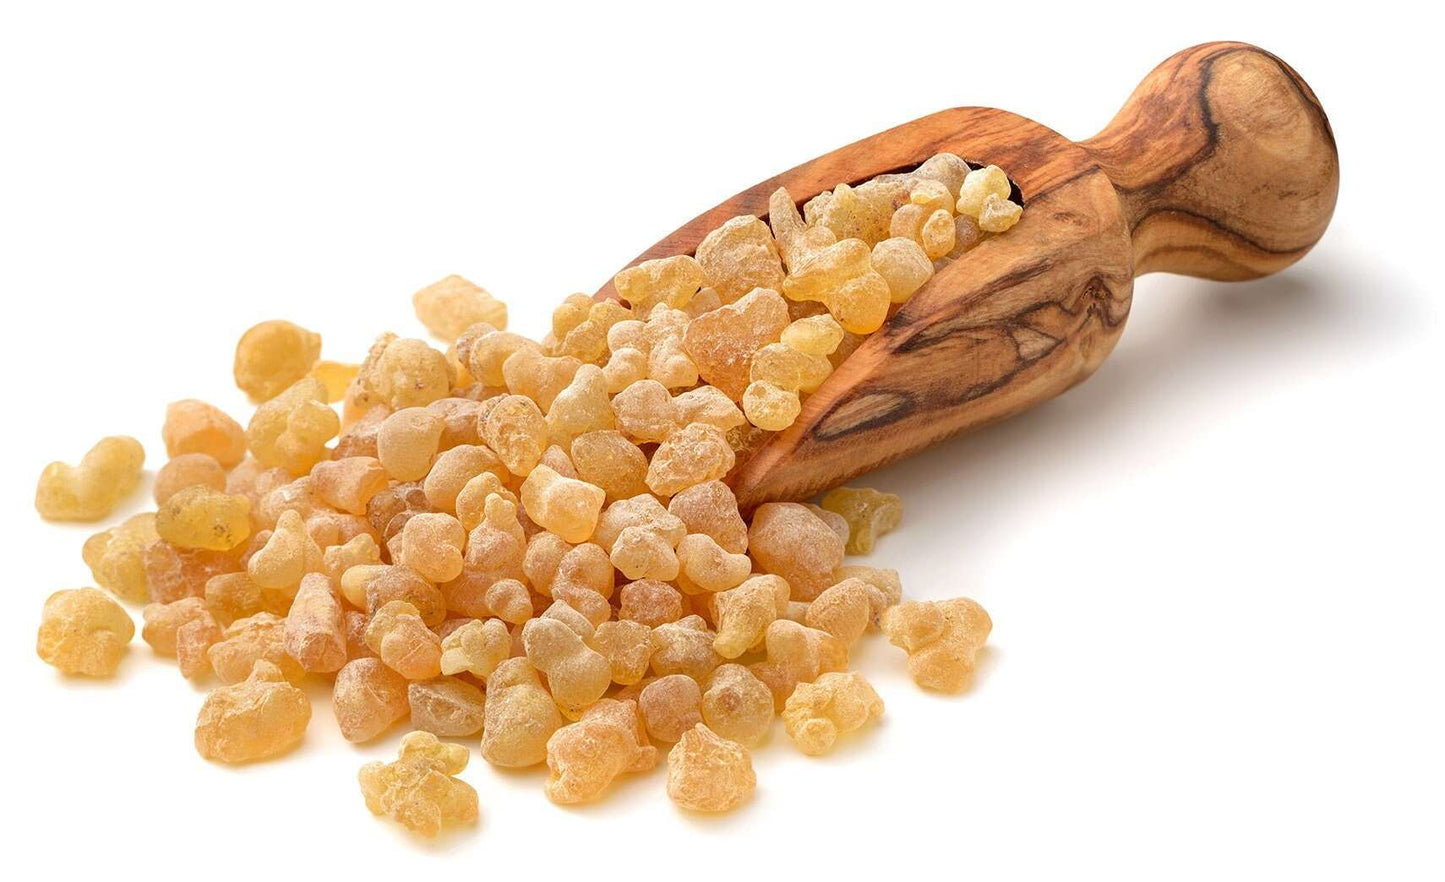 AUTHENIC Pure Frankincense Tears Organic Gum Natural Aromatic Blessed Byzantine Livani Incense Resin Church supplies Aromatherapy in Bulk TheHolyArt